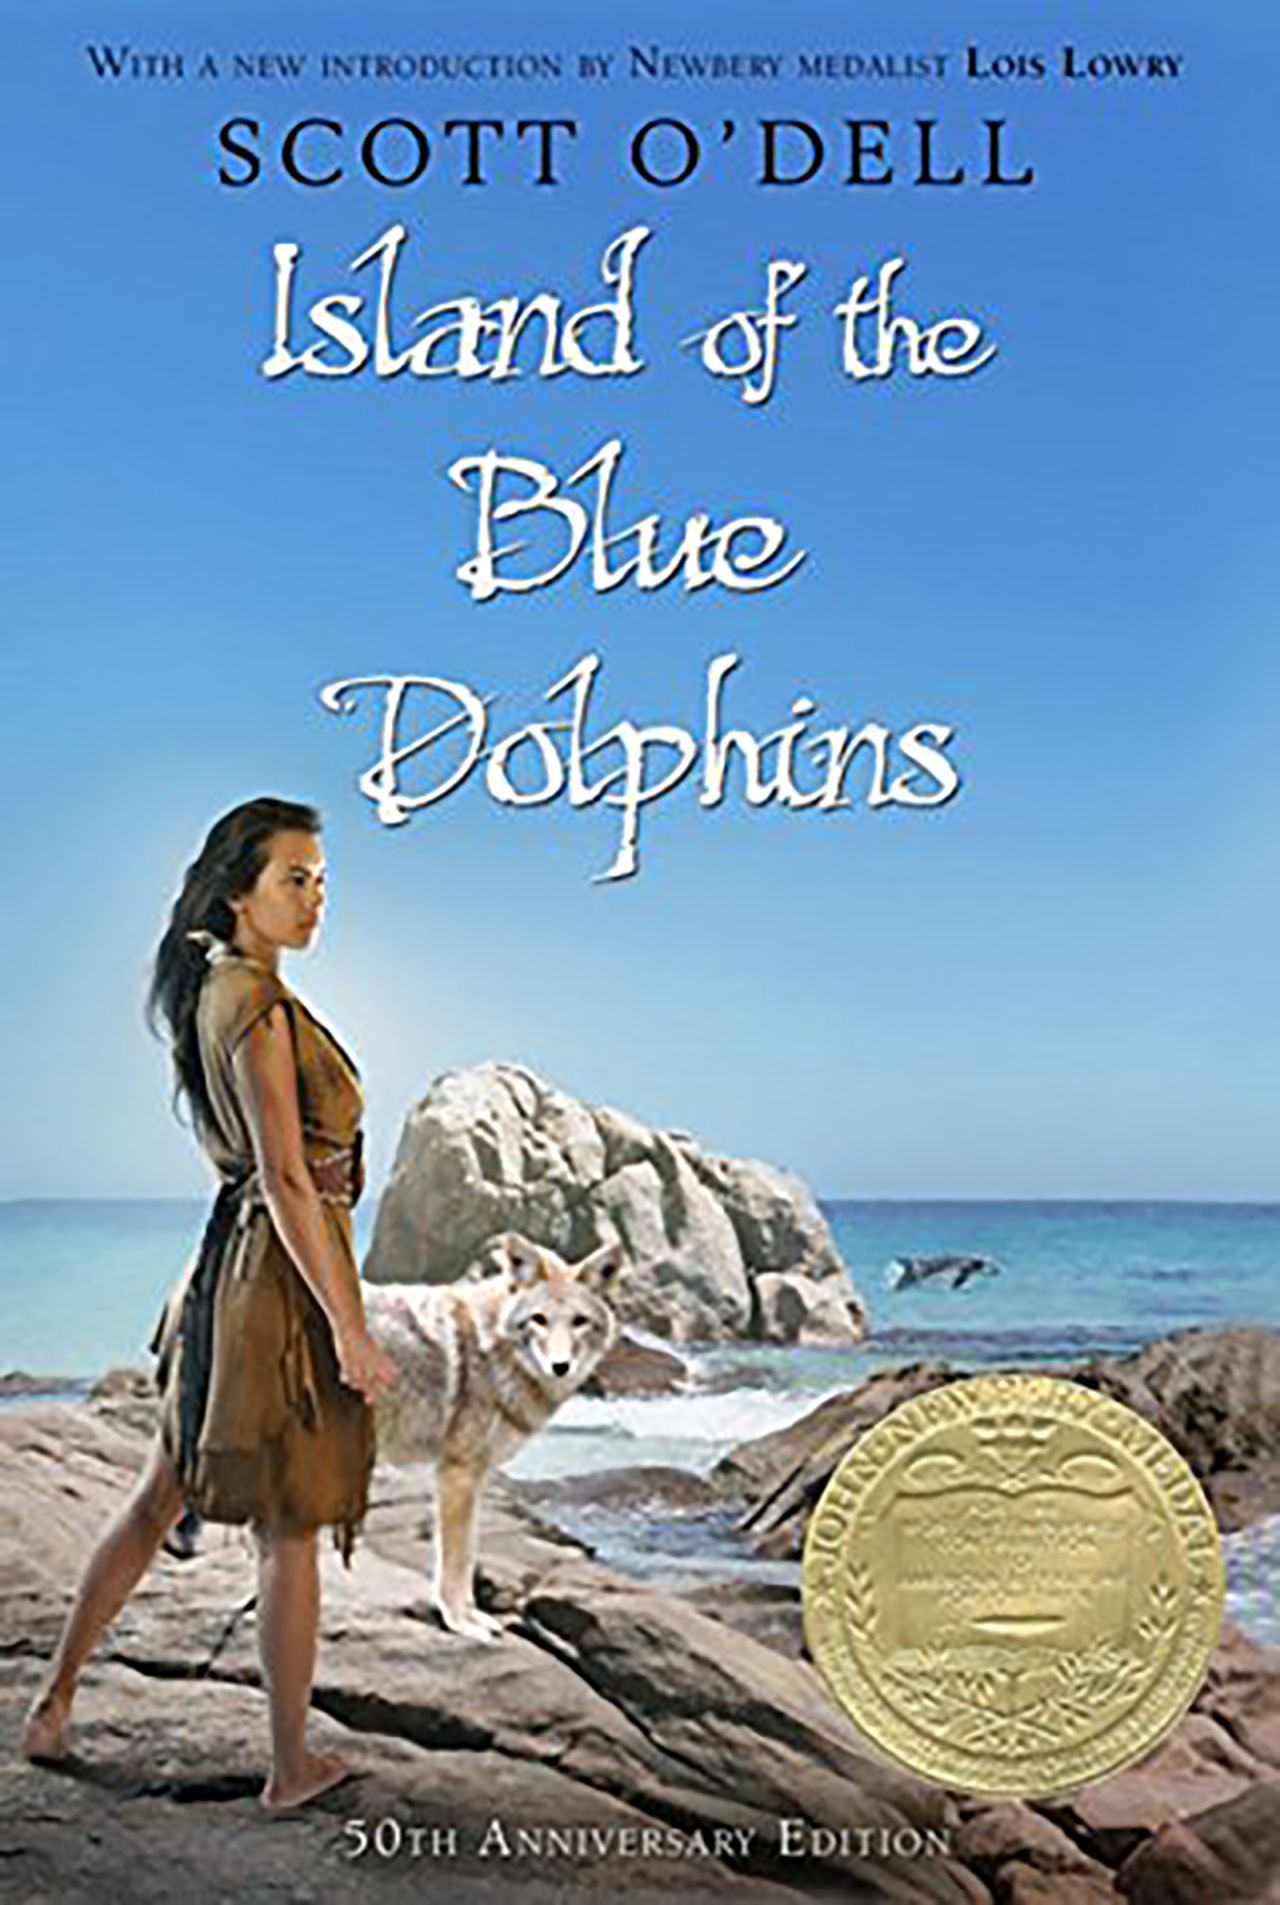 In "Island of the Blue Dolphins" by Scott O'Dell, 12-year-old Karana learns to fend for herself while coping with loneliness, surviving alone on a coastal island.